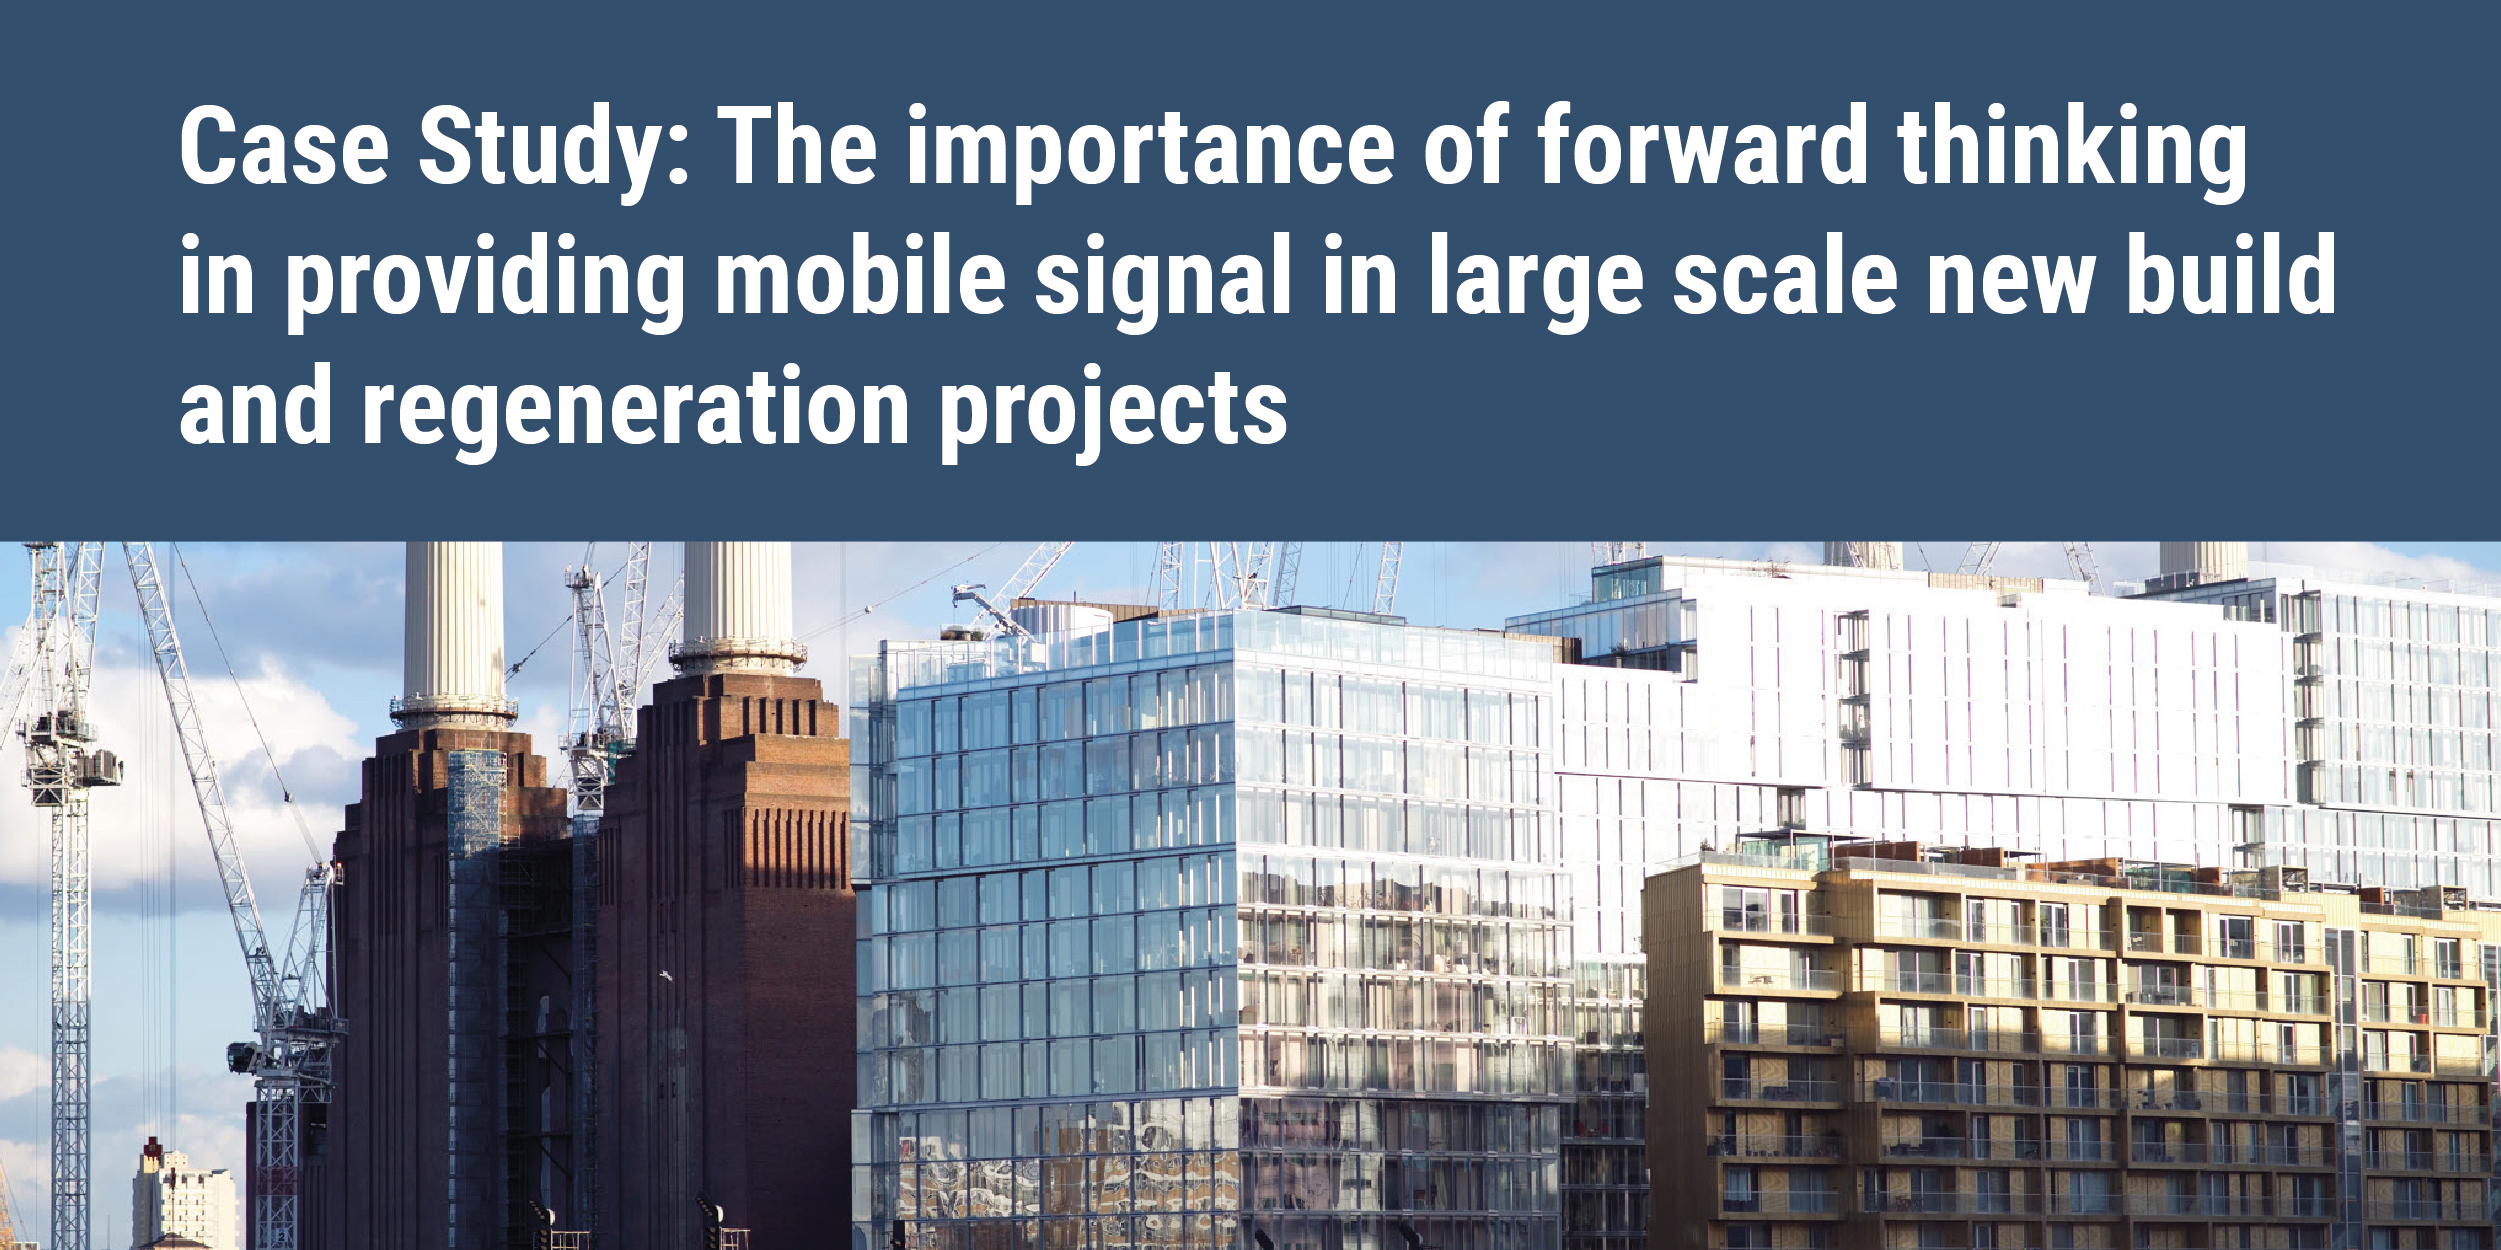 The importance of forward thinking in providing mobile signal in large scale new build and regeneration projects